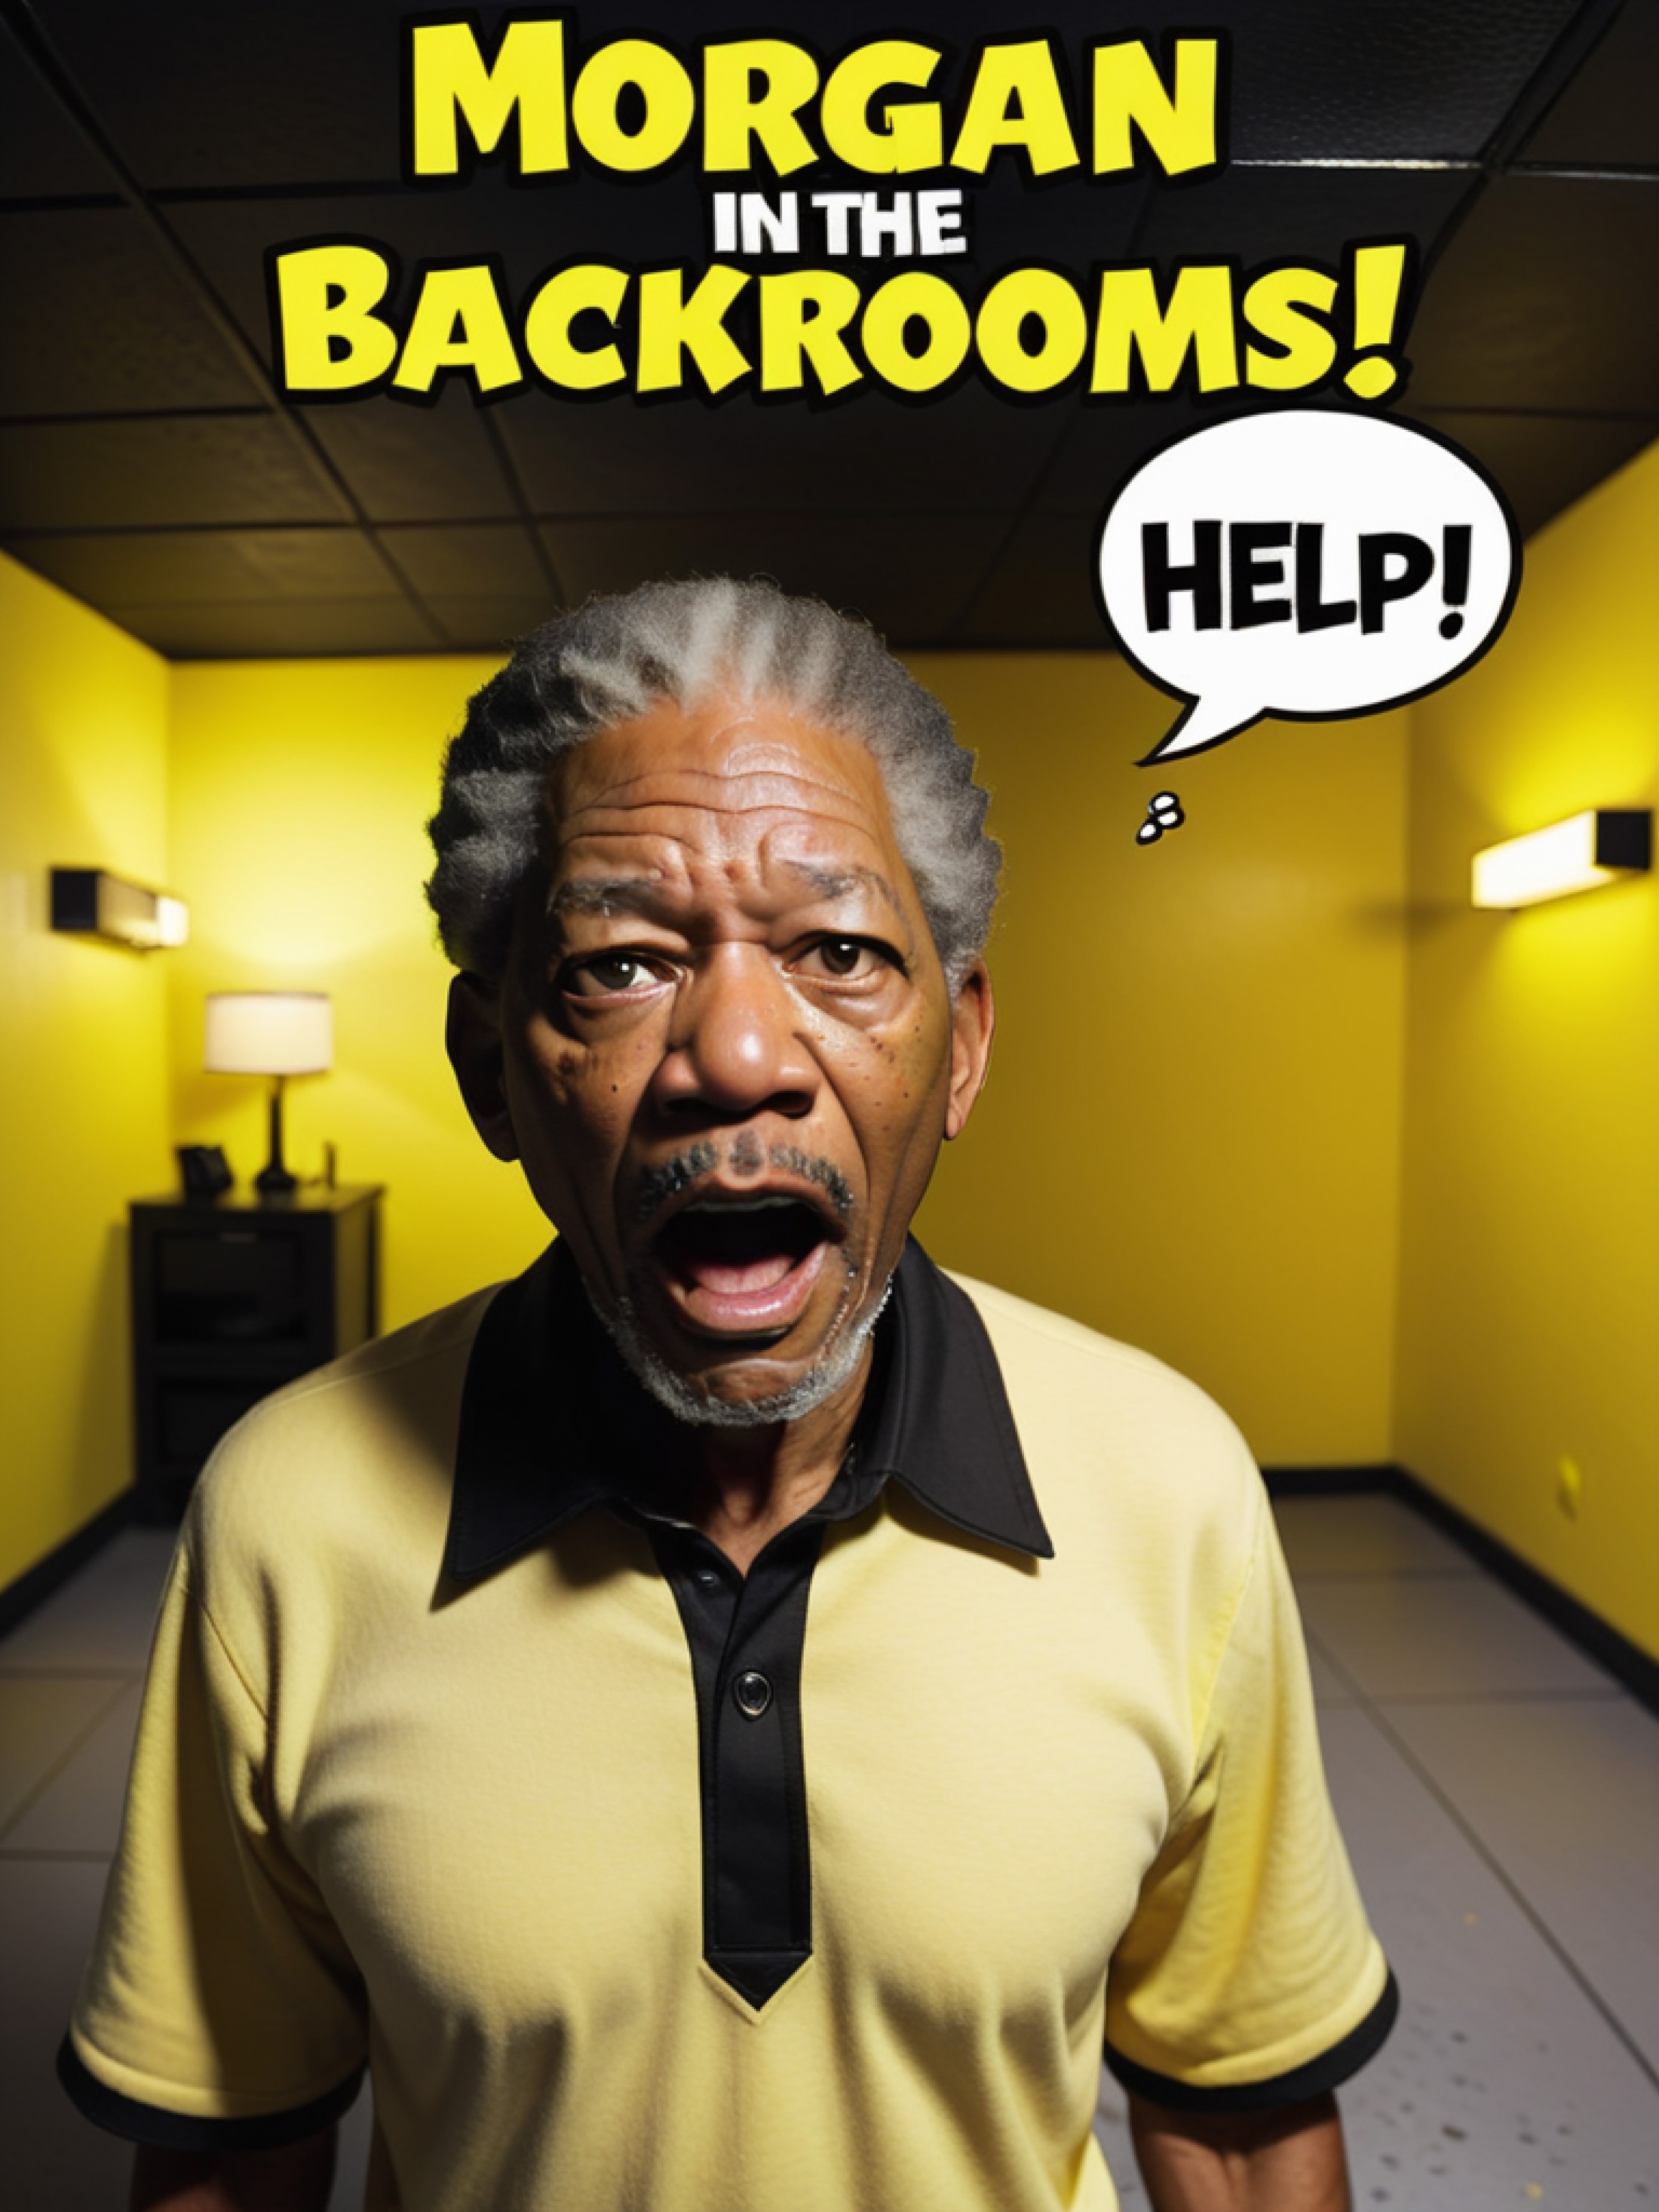 minecraft, bold yellow text says Morgan in the Backrooms!, morgan freeman, shouting, scared, panic, speech bubble says hel...